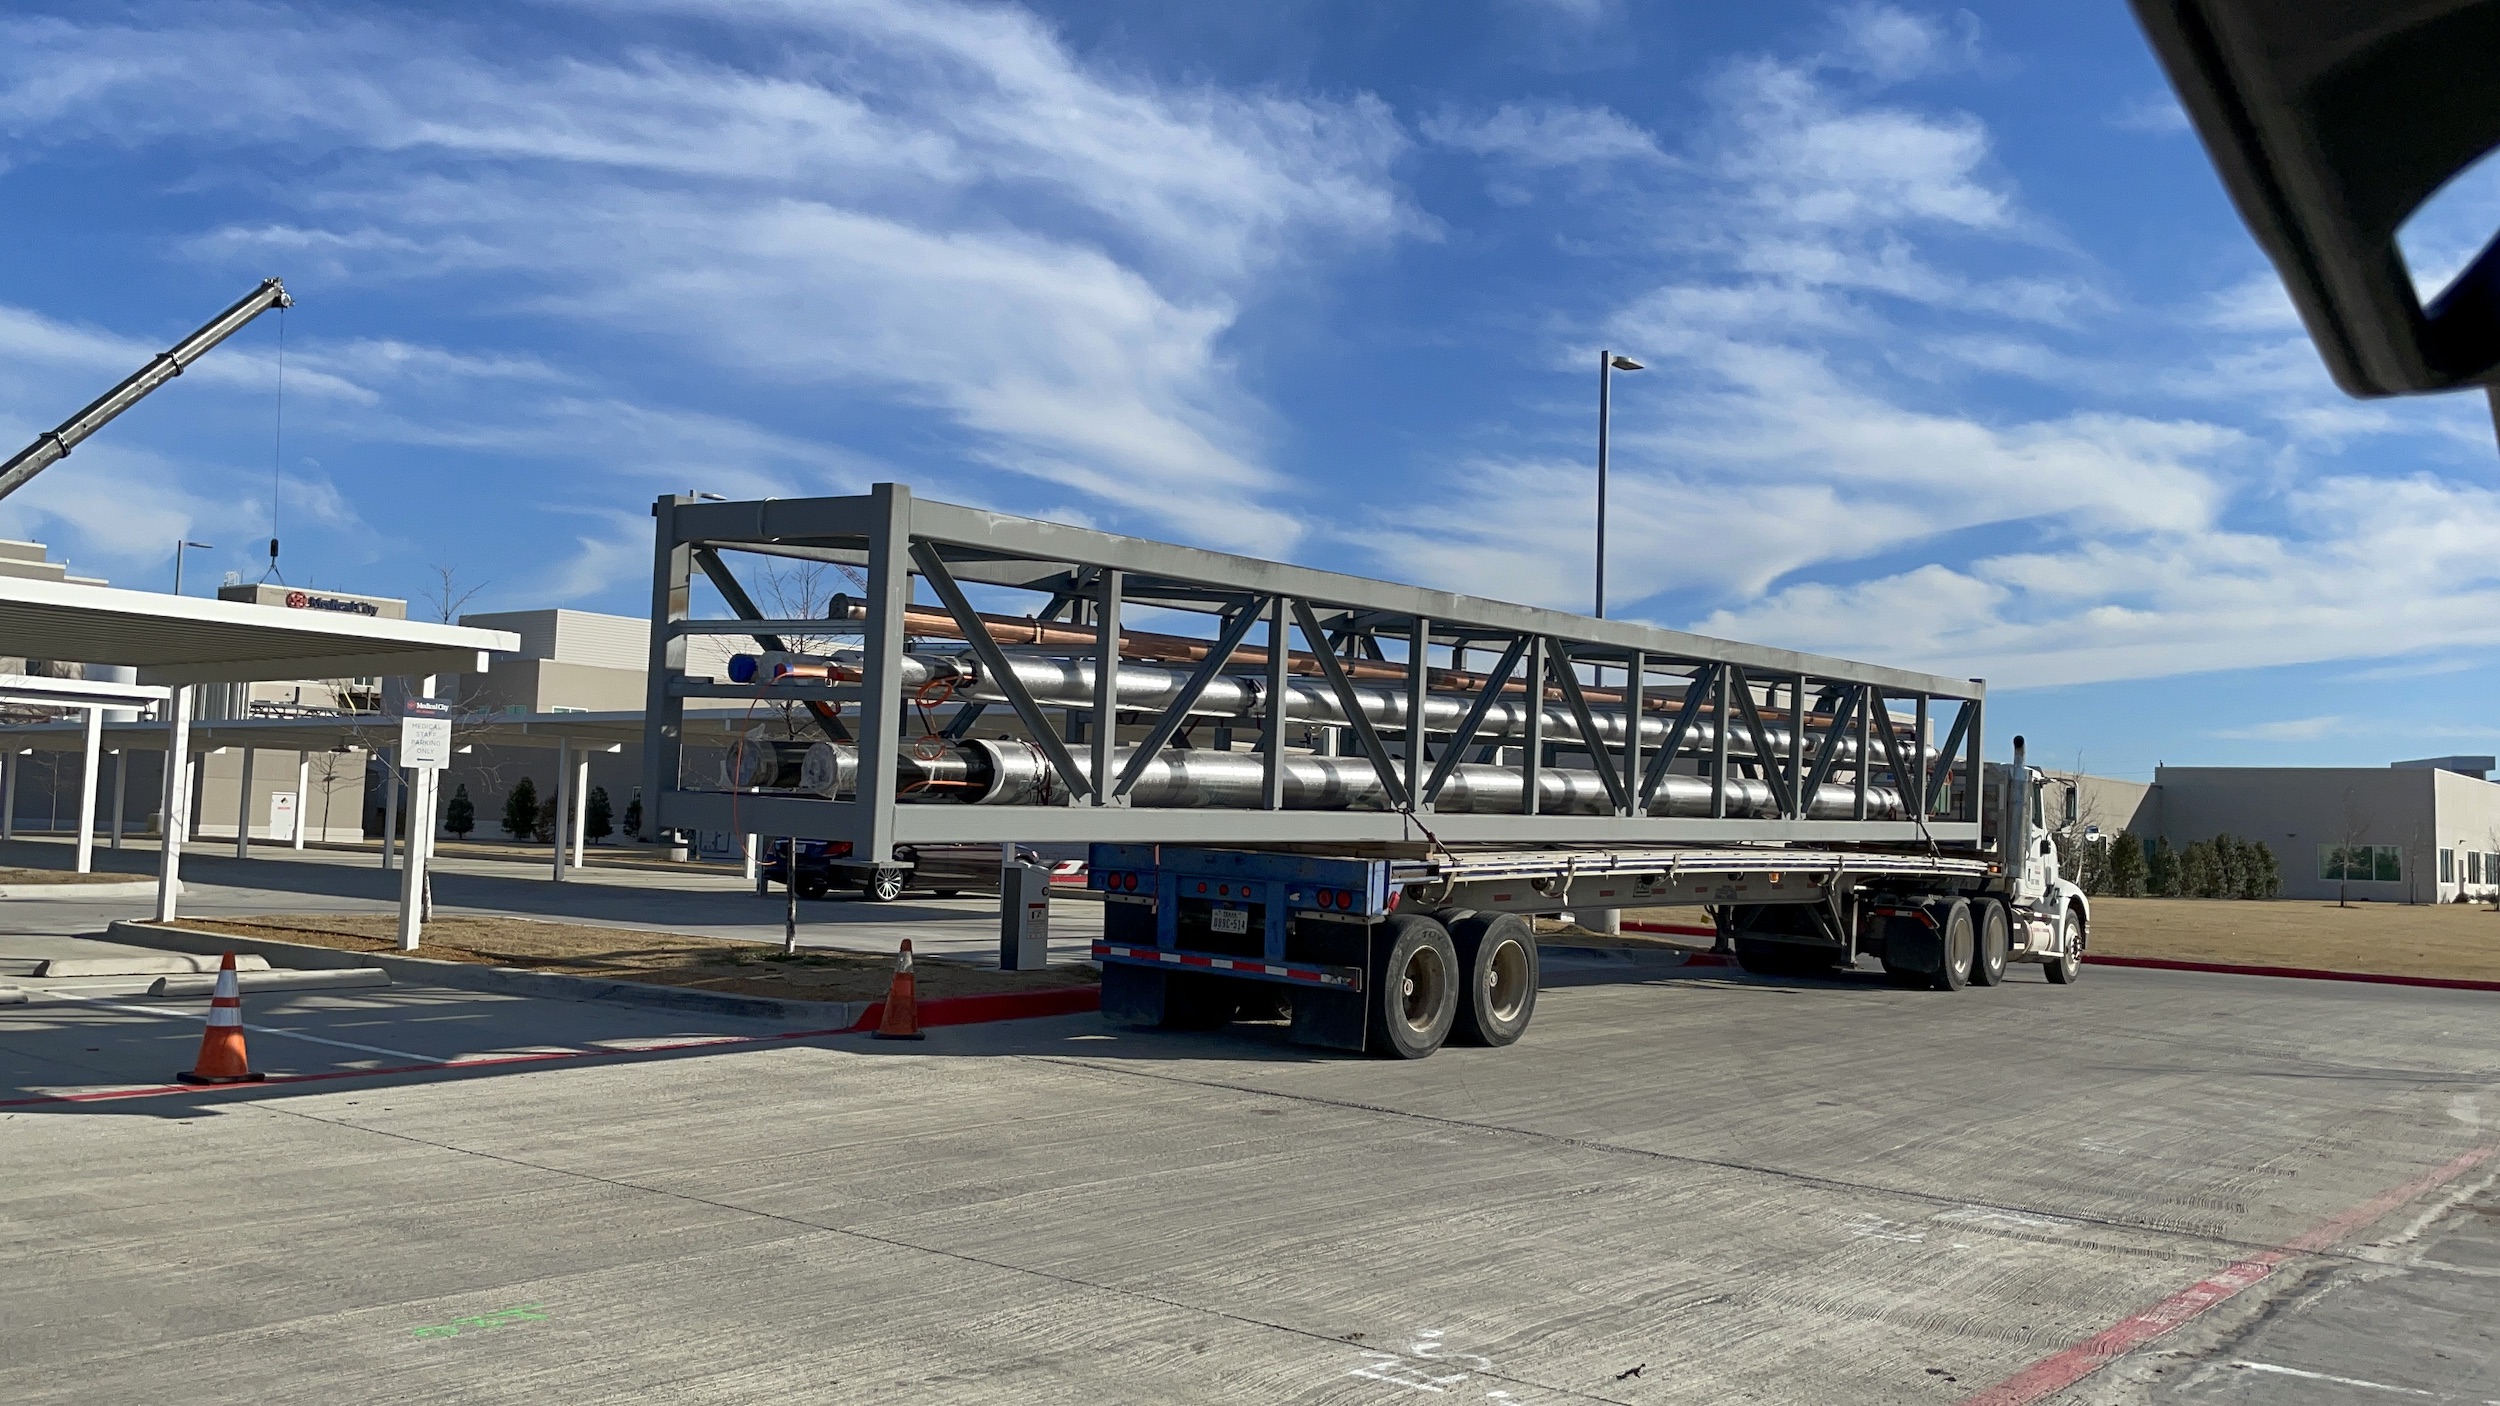 Timing and coordination of logistics, storage, transportation, and installation staging and sequencing are critical to maintaining prefabrication schedule efficiencies.